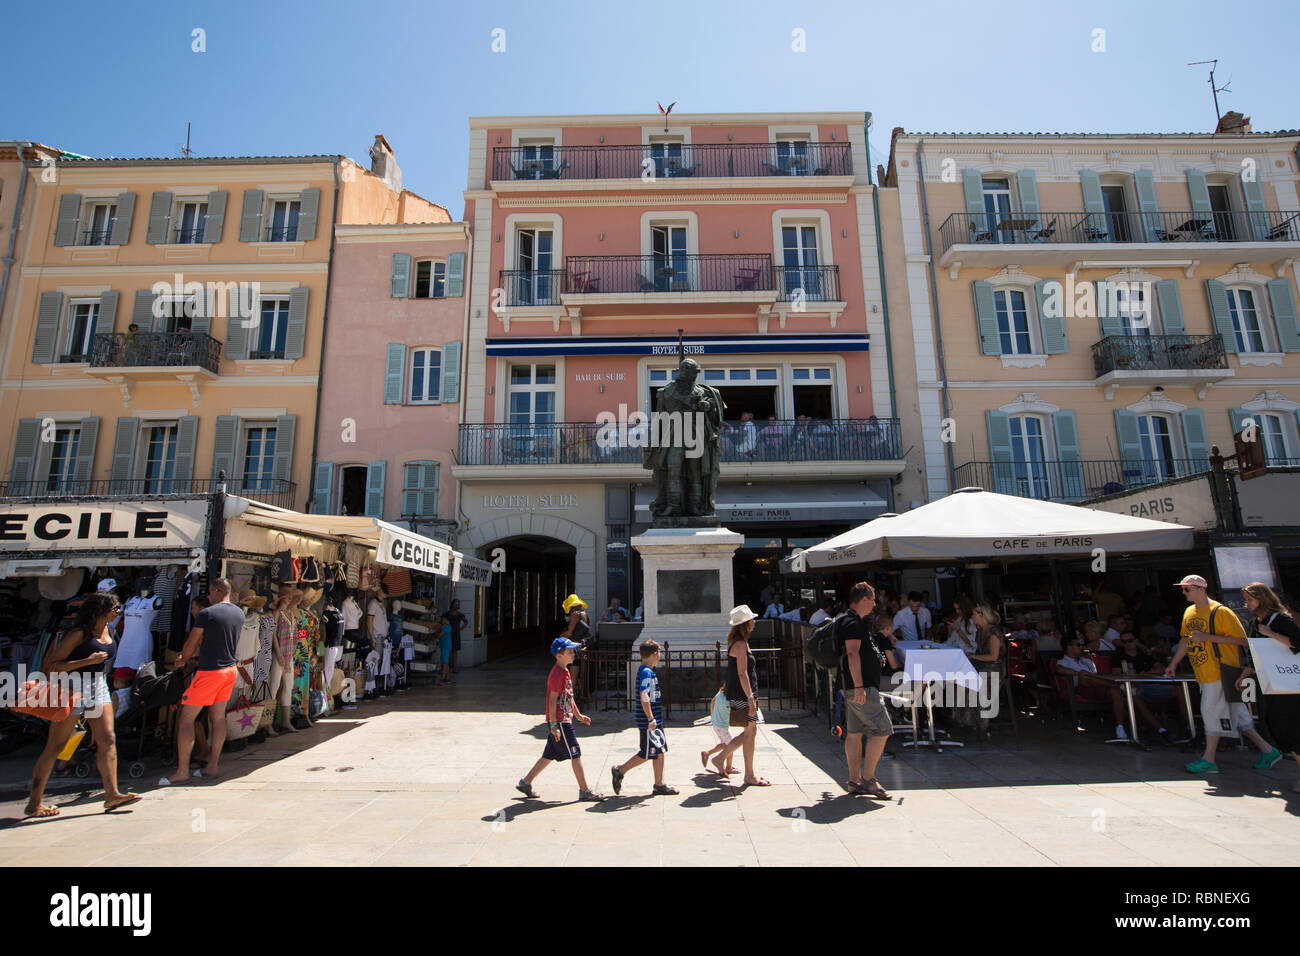 Saint-Tropez coastal town on the French Riviera, in the Provence-Alpes-Côte d'Azur region of southeastern France, Europe Stock Photo